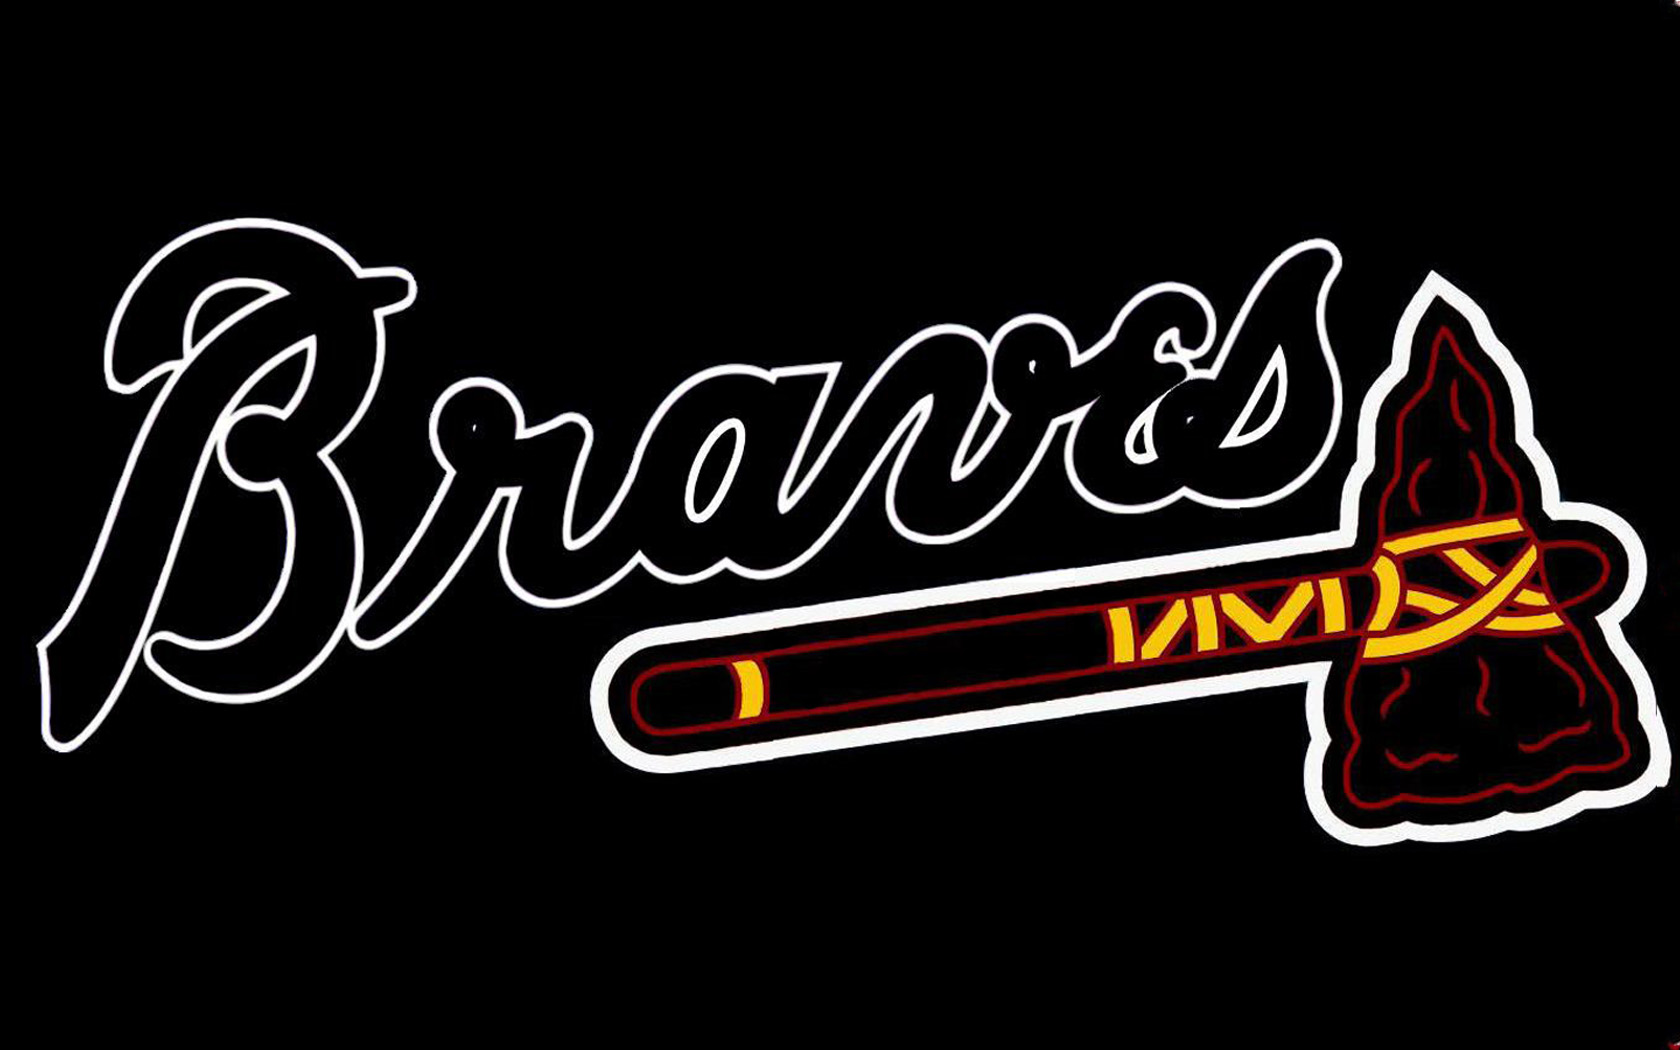 braves iphone wallpaper,font,text,logo,brand,graphics